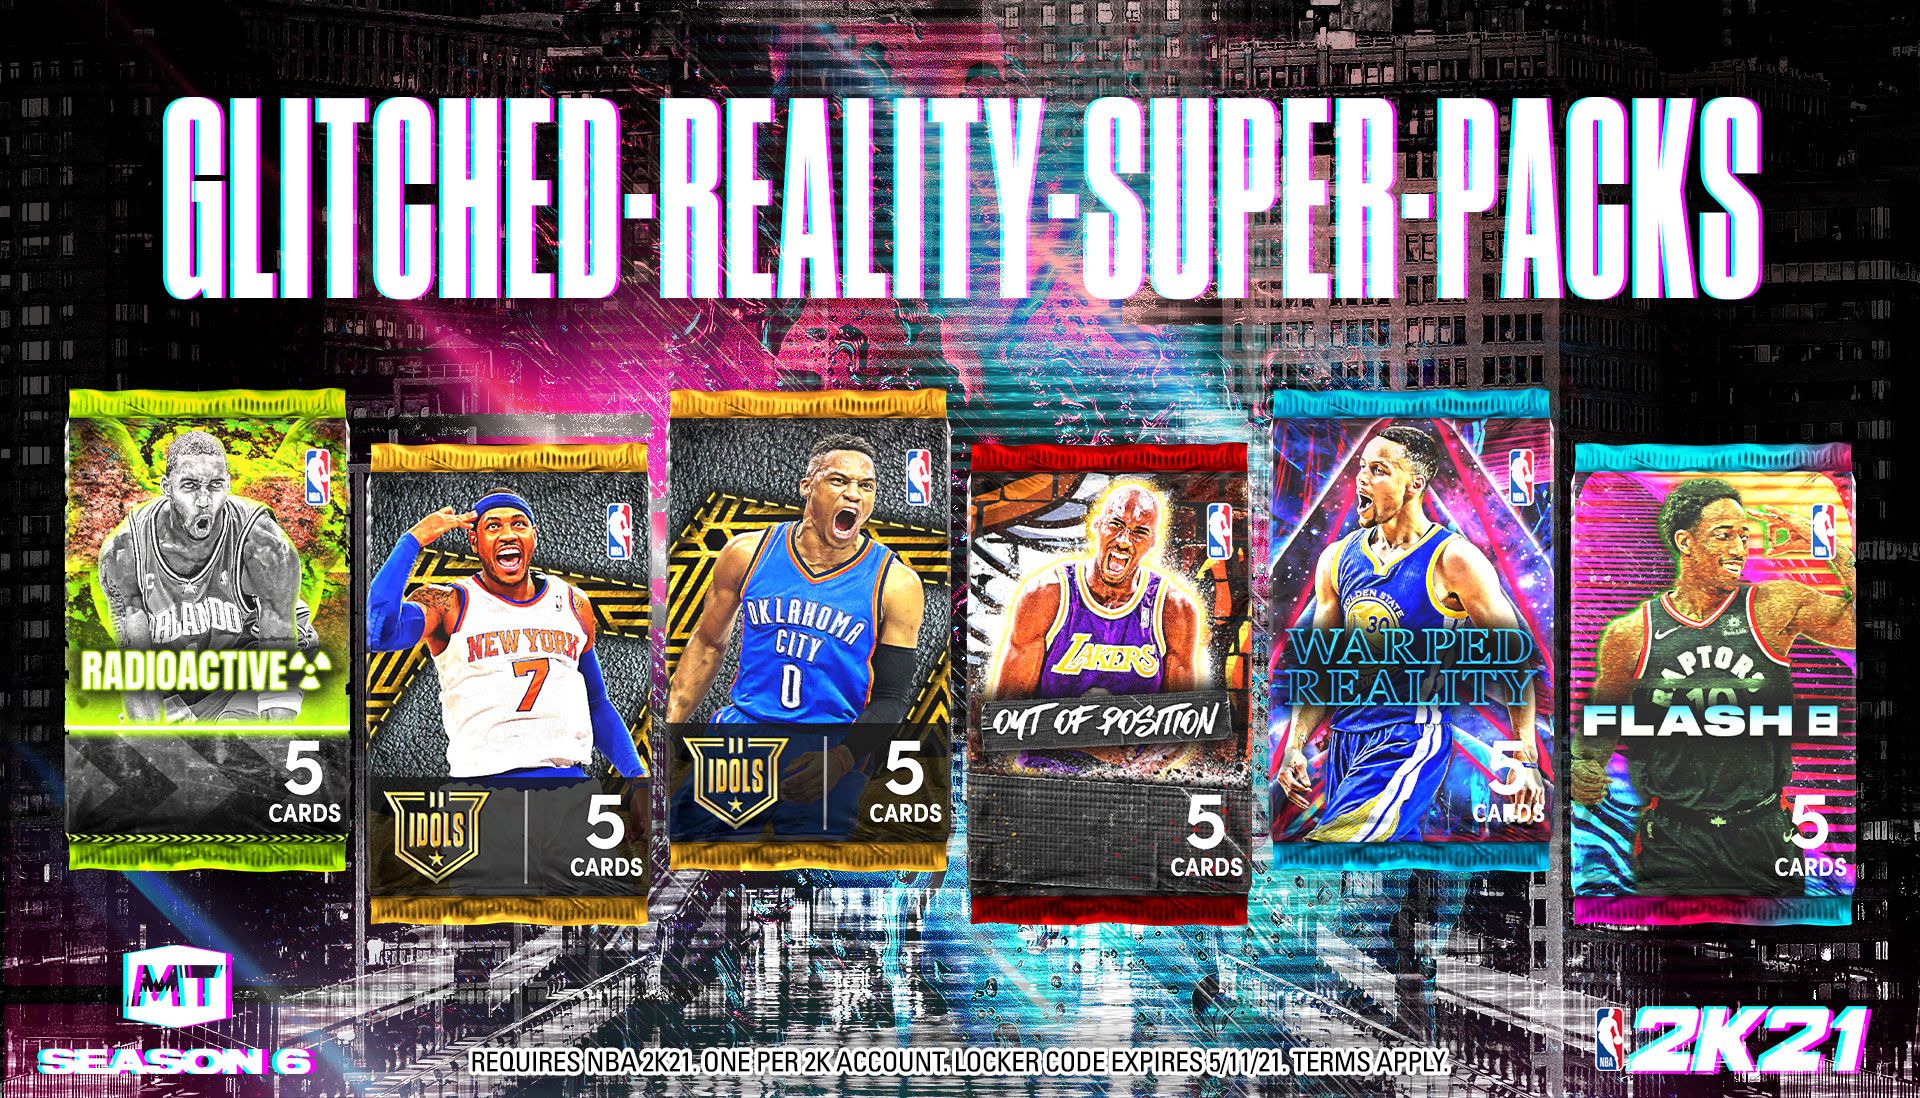 warped reality cards 2k21